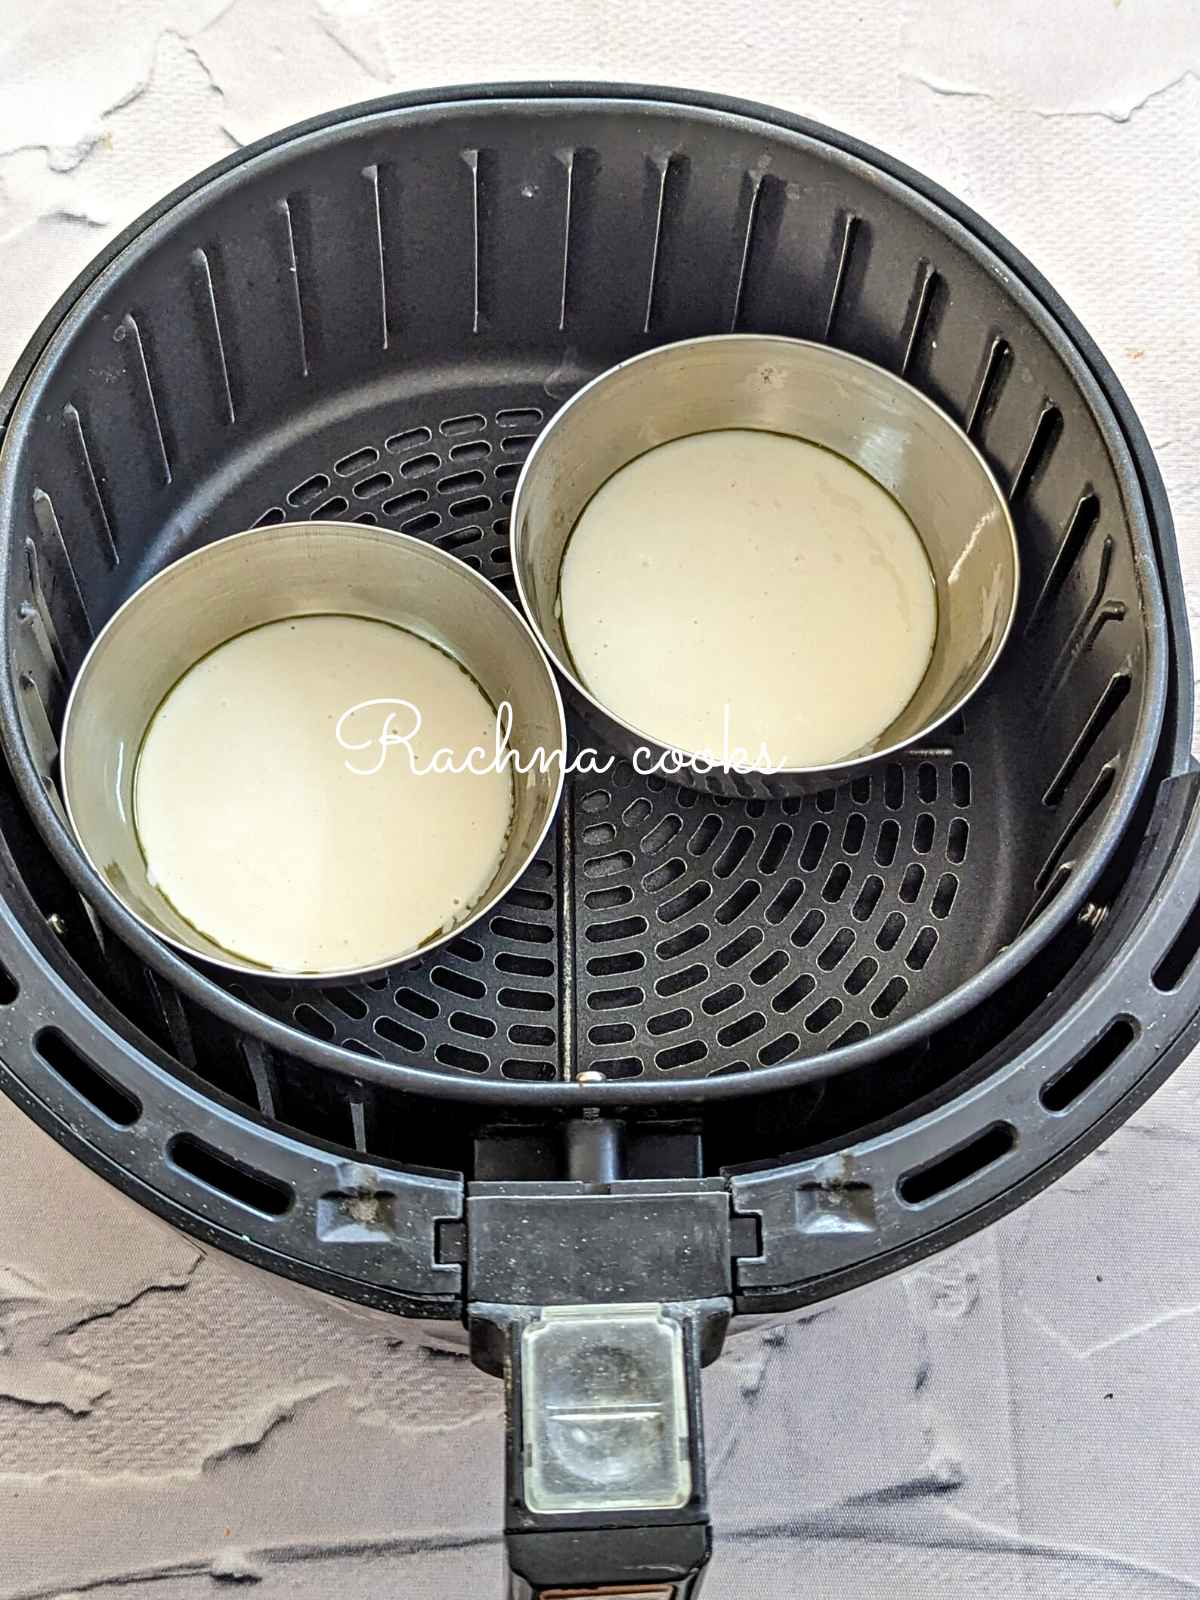 Pancake batter poured in two metal moulds placed in air fryer basket for air frying.